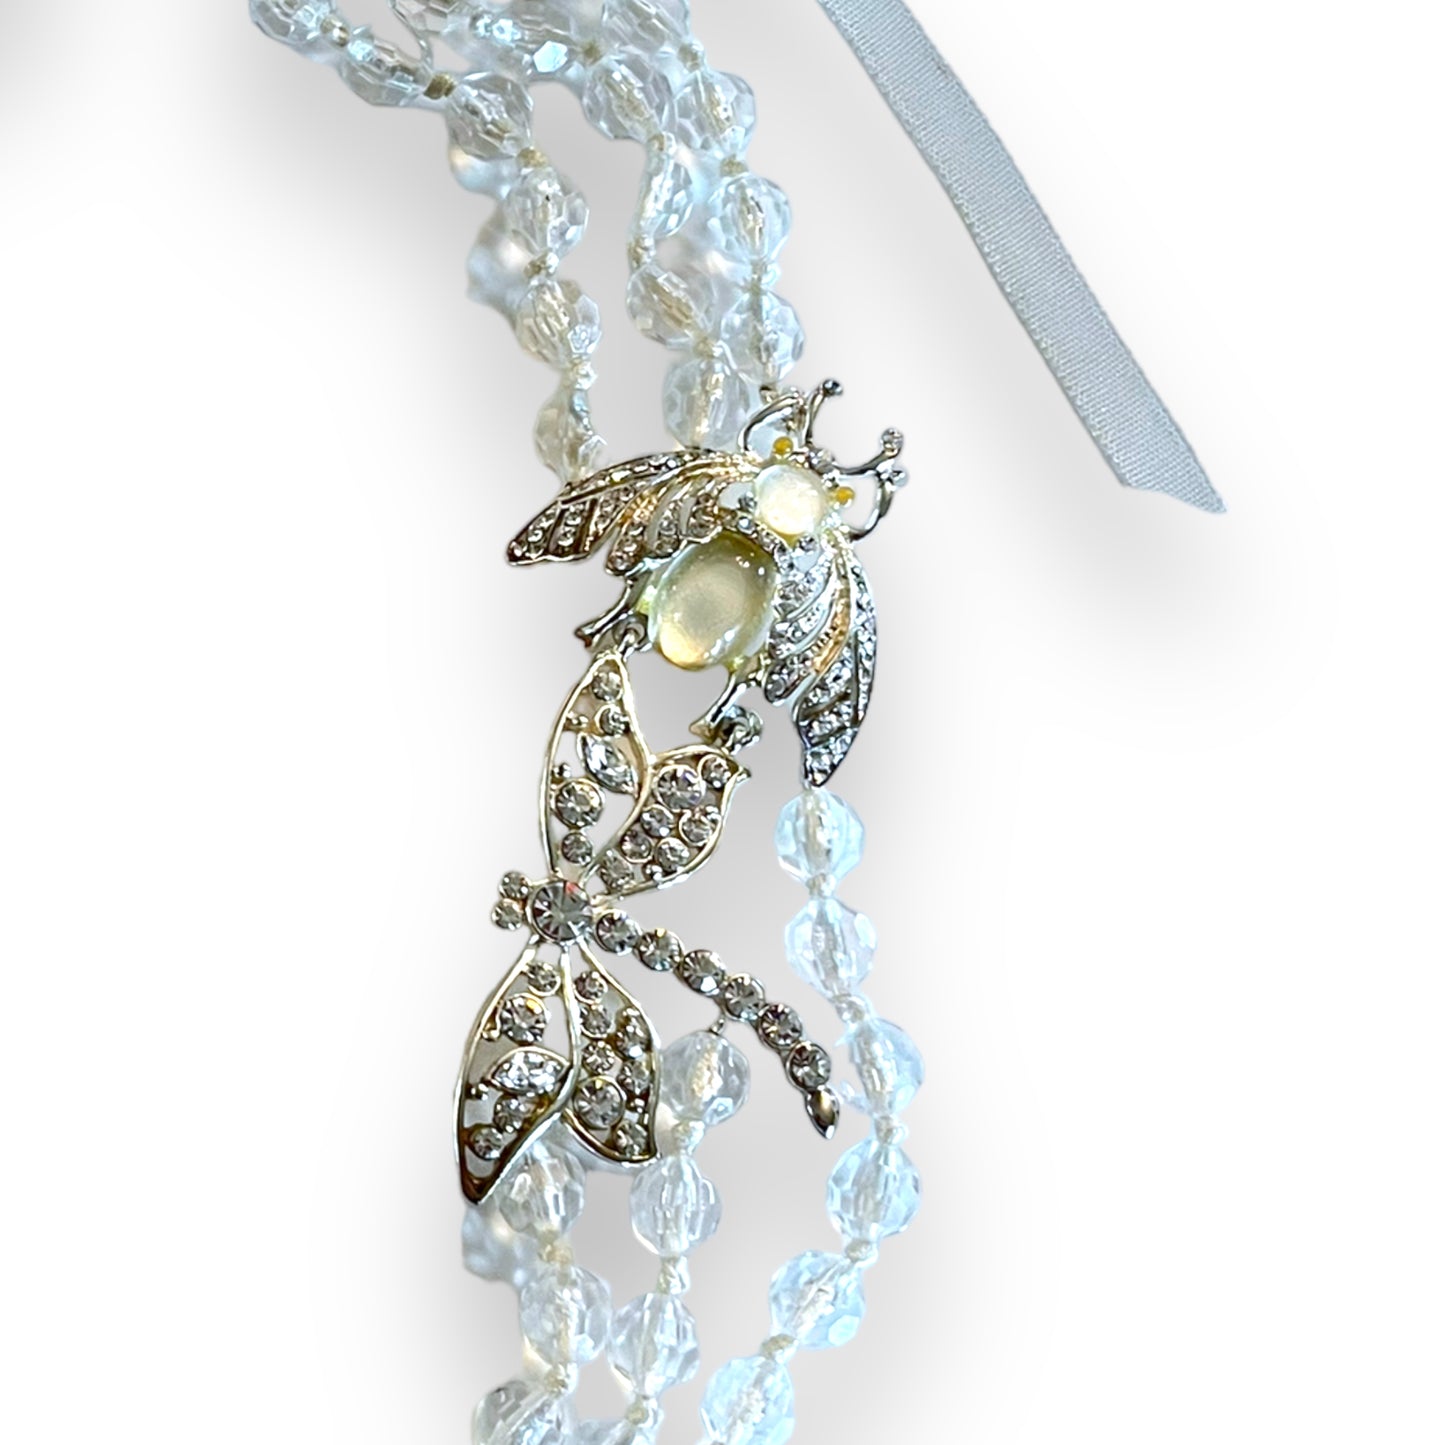 Beaded Jewel Dragonfly Necklace